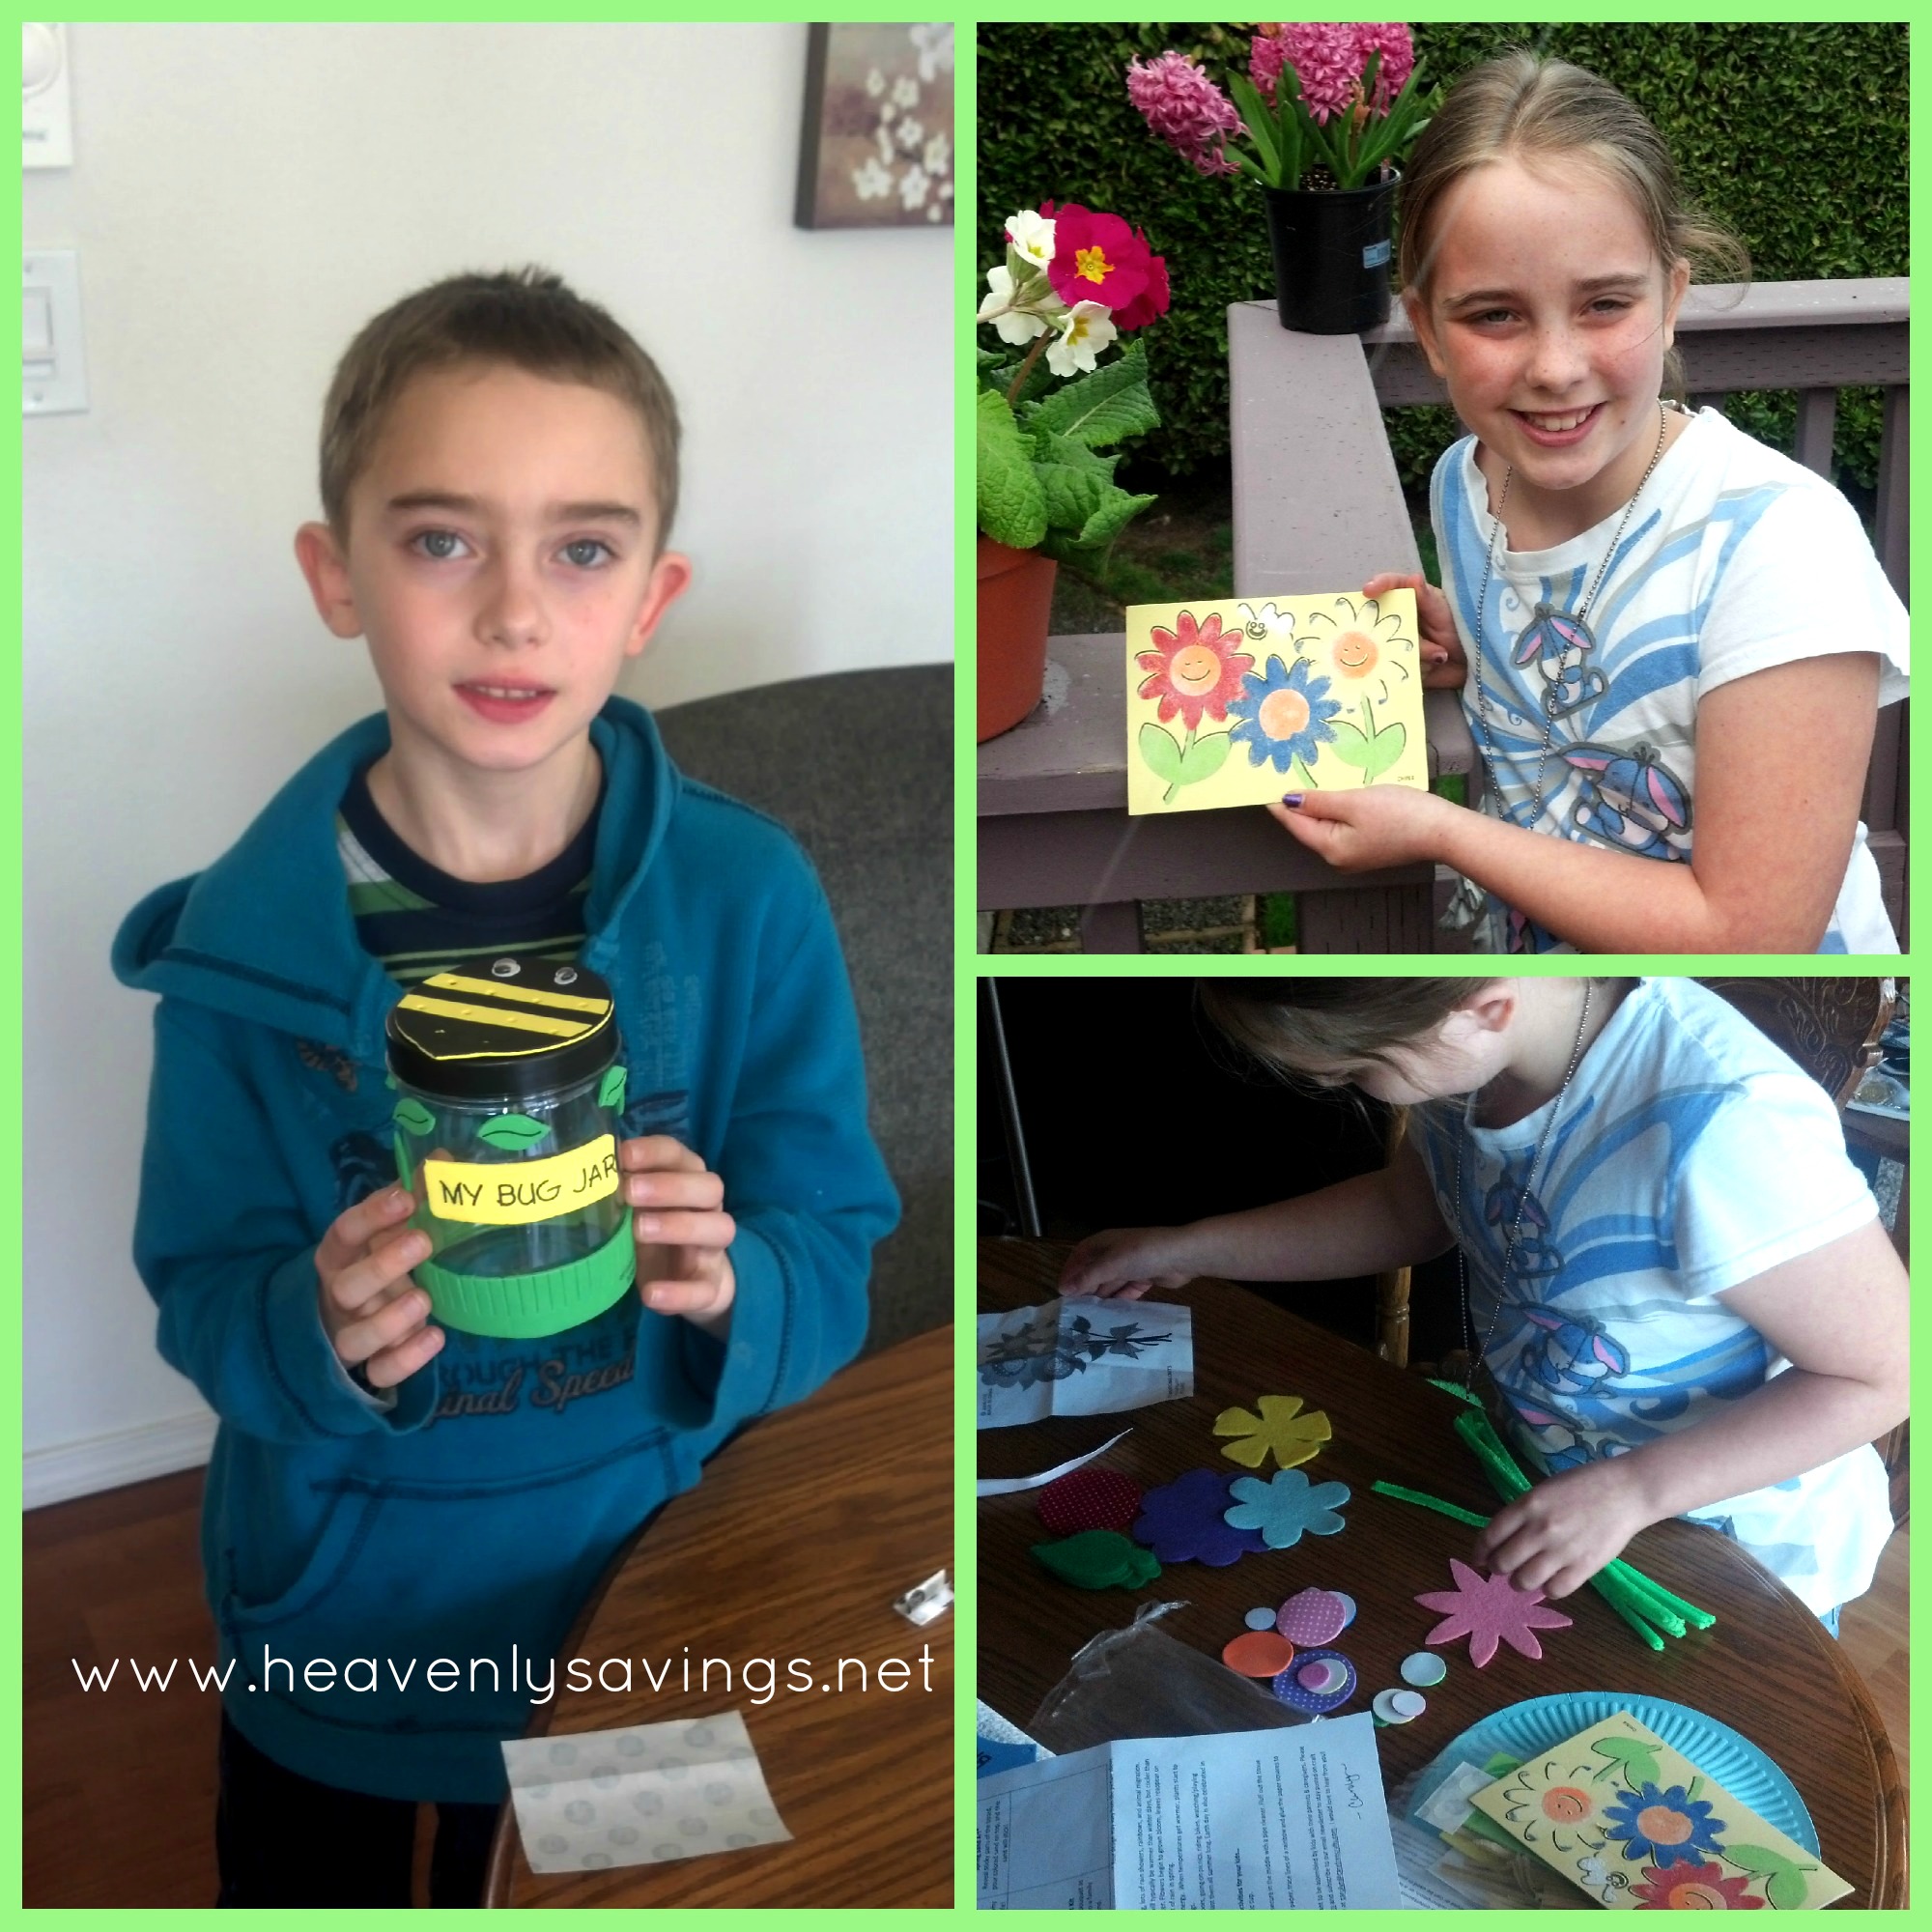 Carefree Crafts Review and Giveaway + 5 Craft Kits (just pay $5.95)! Ends 5/11/13!